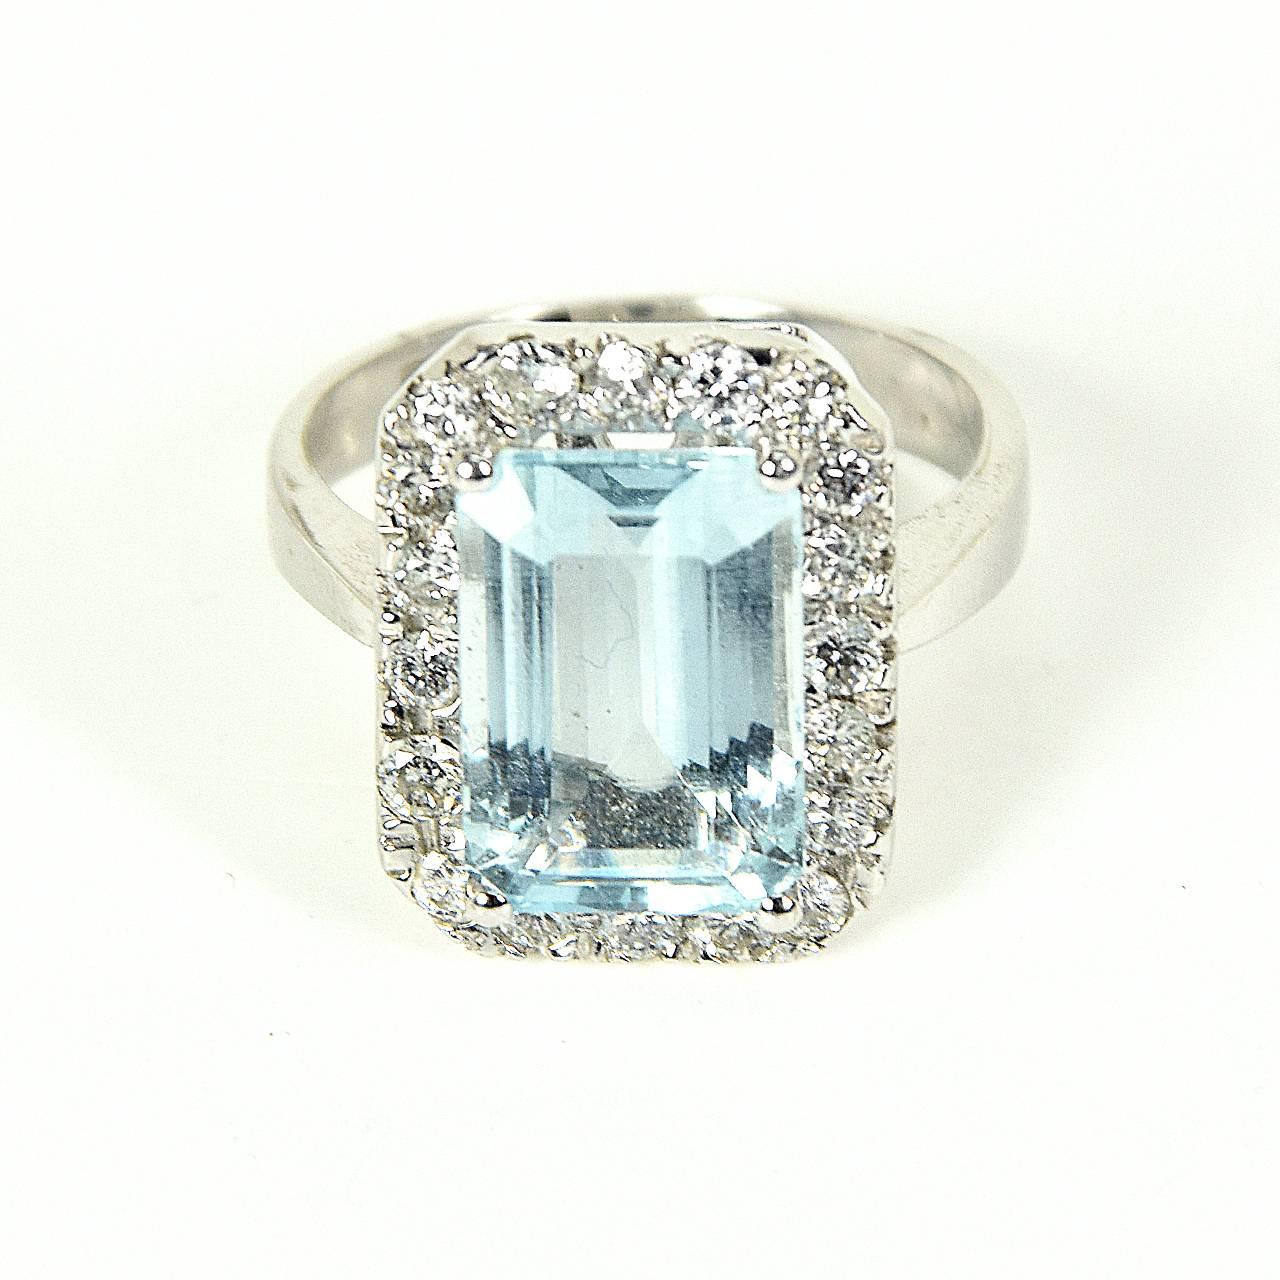 Aquamarine set Ring in 4 claws, surrounded by 19 approximately 2.0-2.1 mm diameter round brilliant cut diamonds
total diamond weight : 60ct
Aquamarine : 4.3ct
ring size: American - 7, French/Japanese - 14, English/Australian - N 1/2, Metric - 54.1044